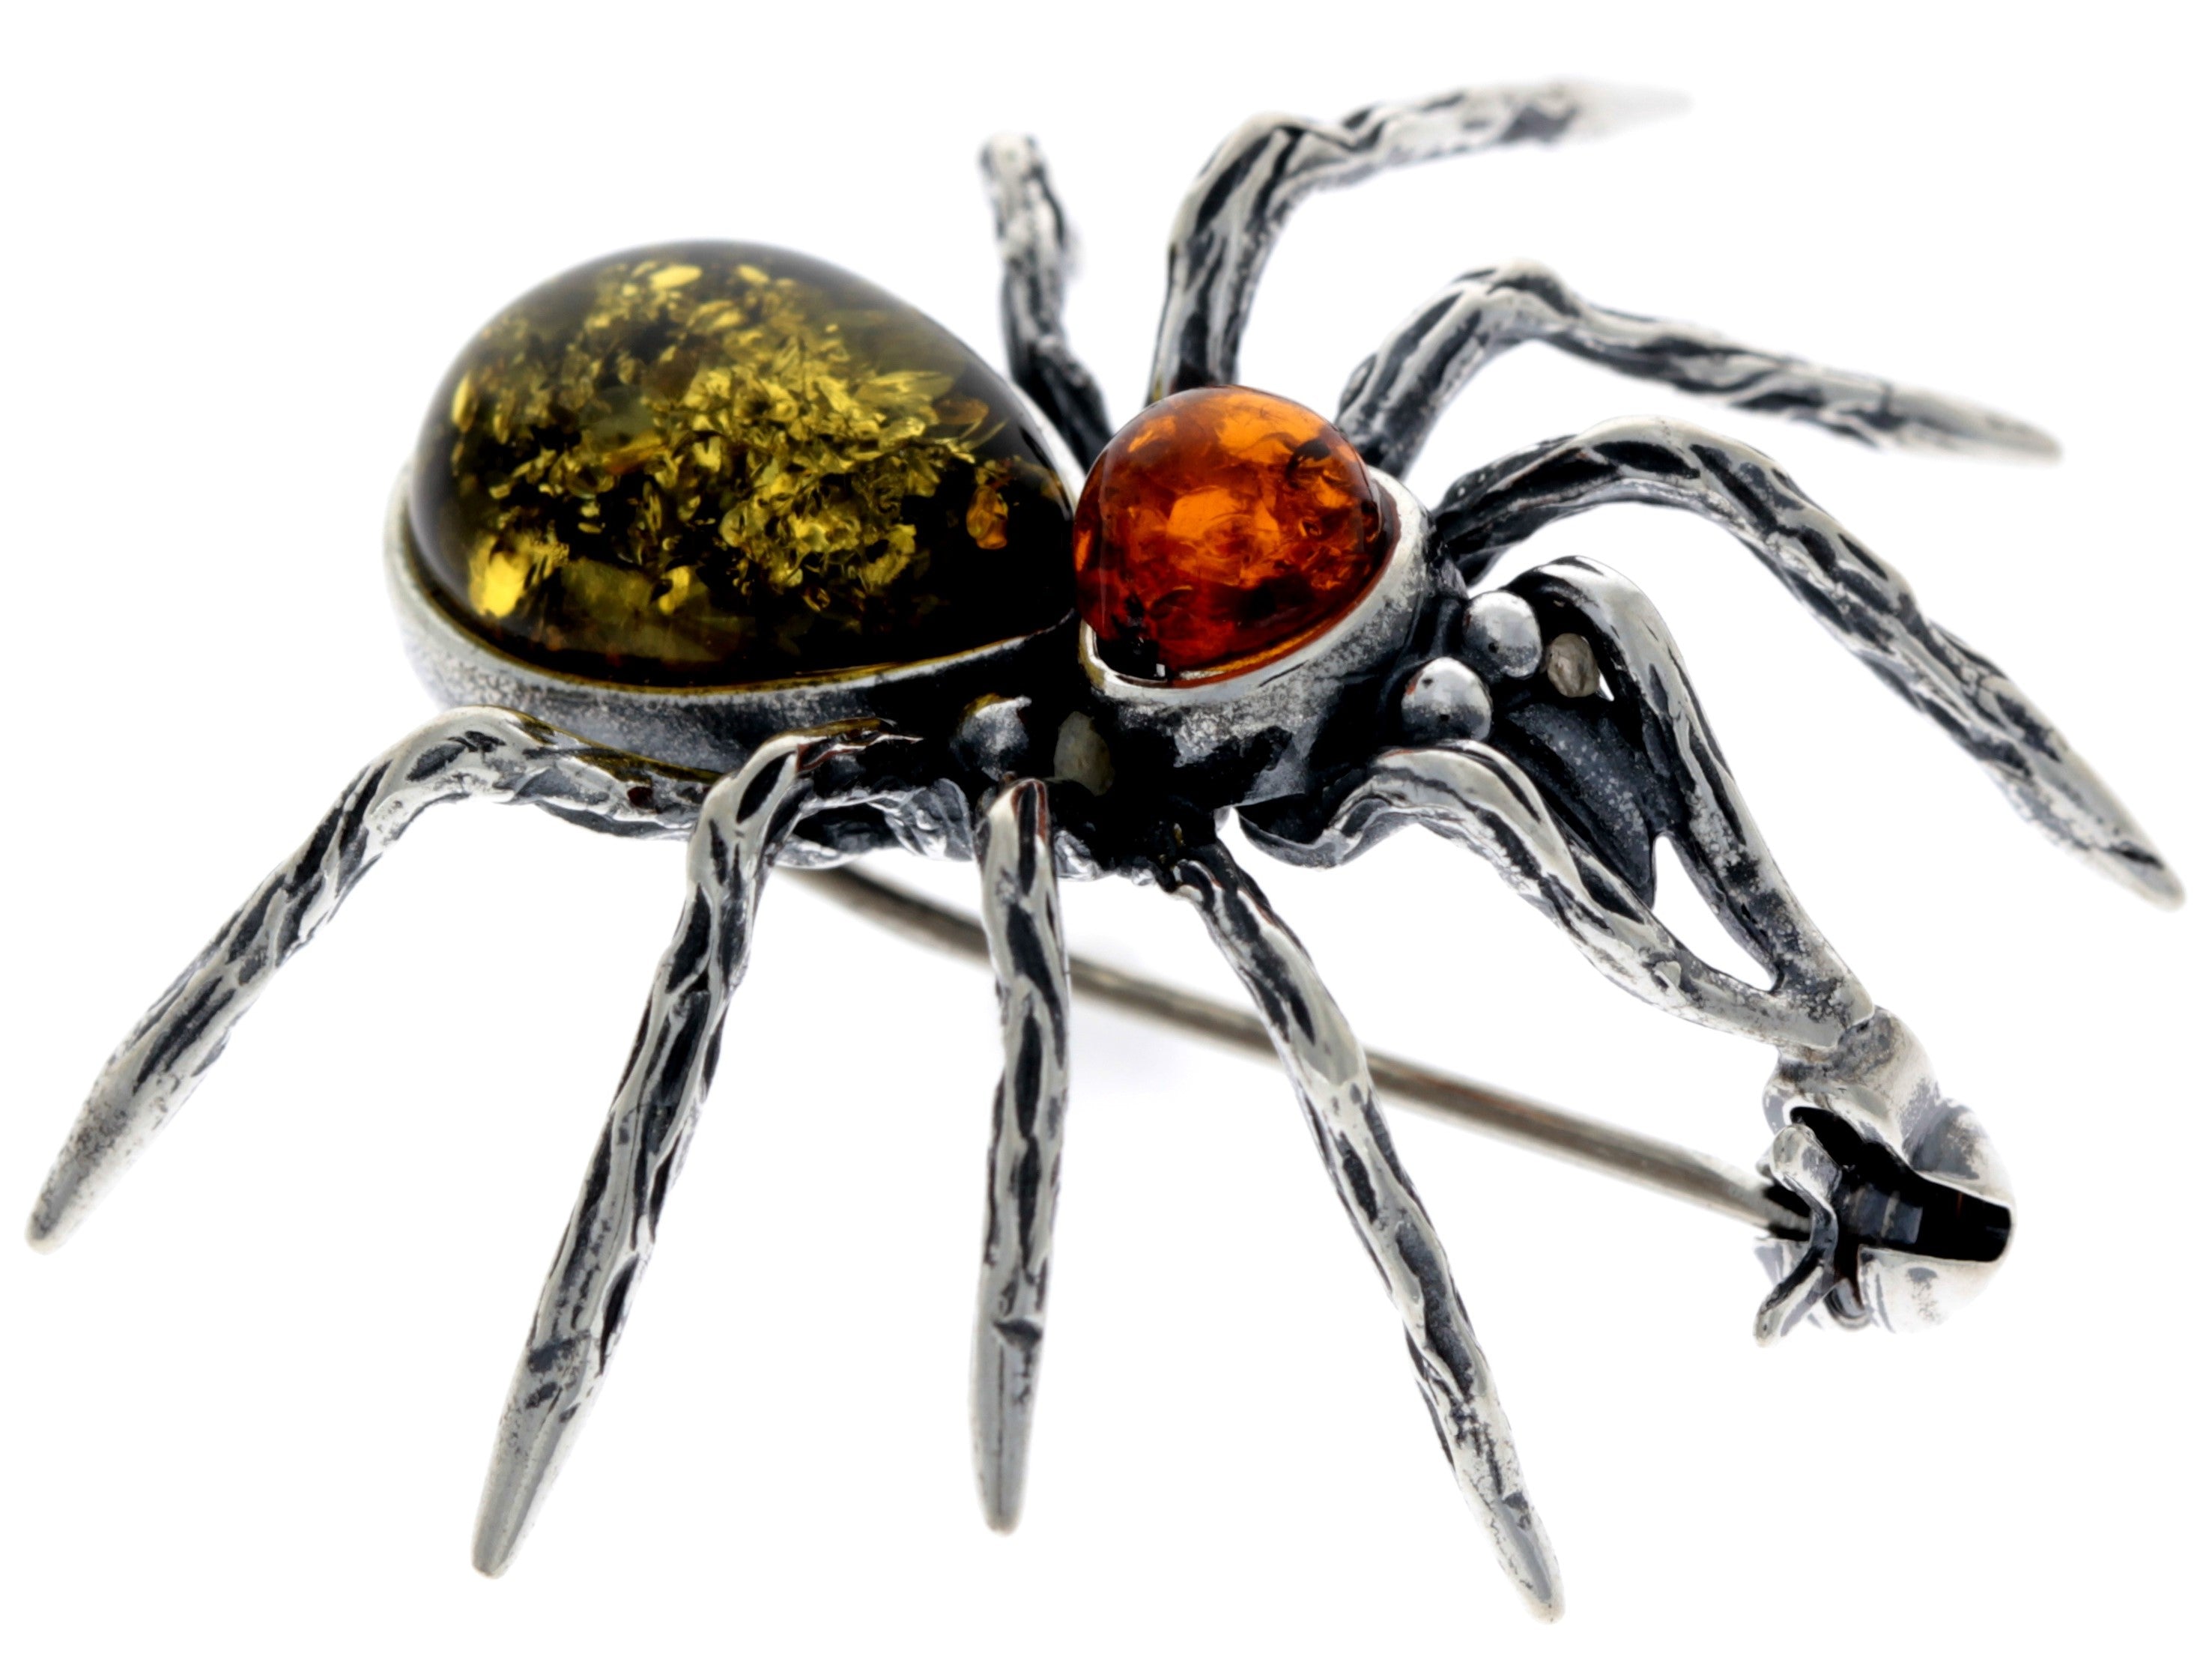 925 Sterling Silver & Baltic Amber Spider Brooch - 4152